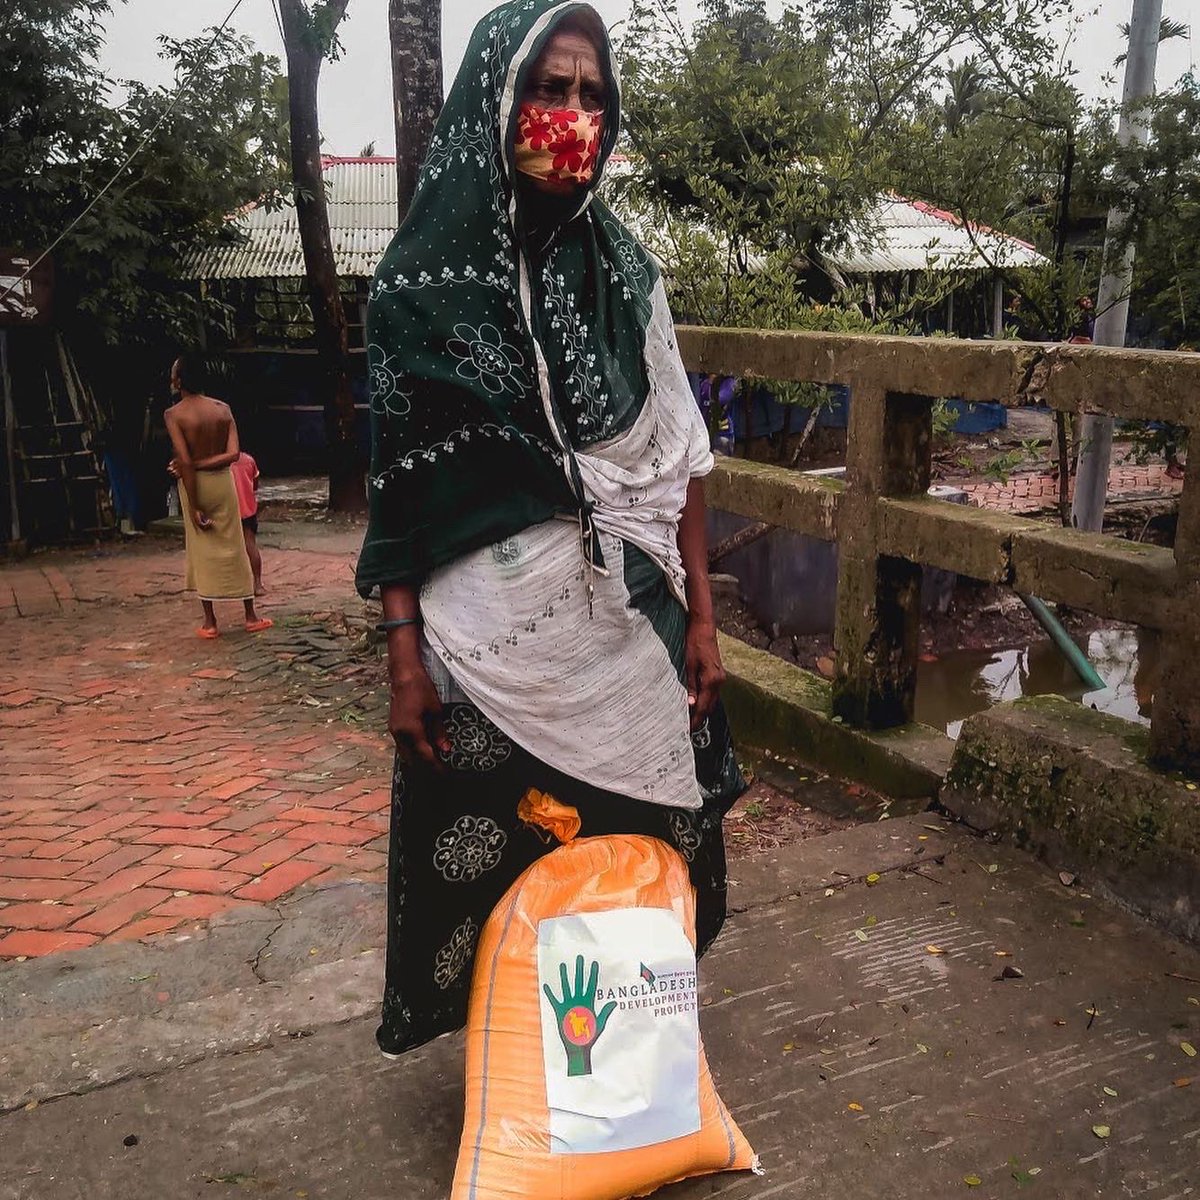 Sathkira was devastated by Cyclone Ampham. Our volunteers were able to feed 25 families who lost everything due to storms. These packages will keep these families fed for a month while they try to regain what they lost. 
#COVID19 #charity #donate #cycloneamphan